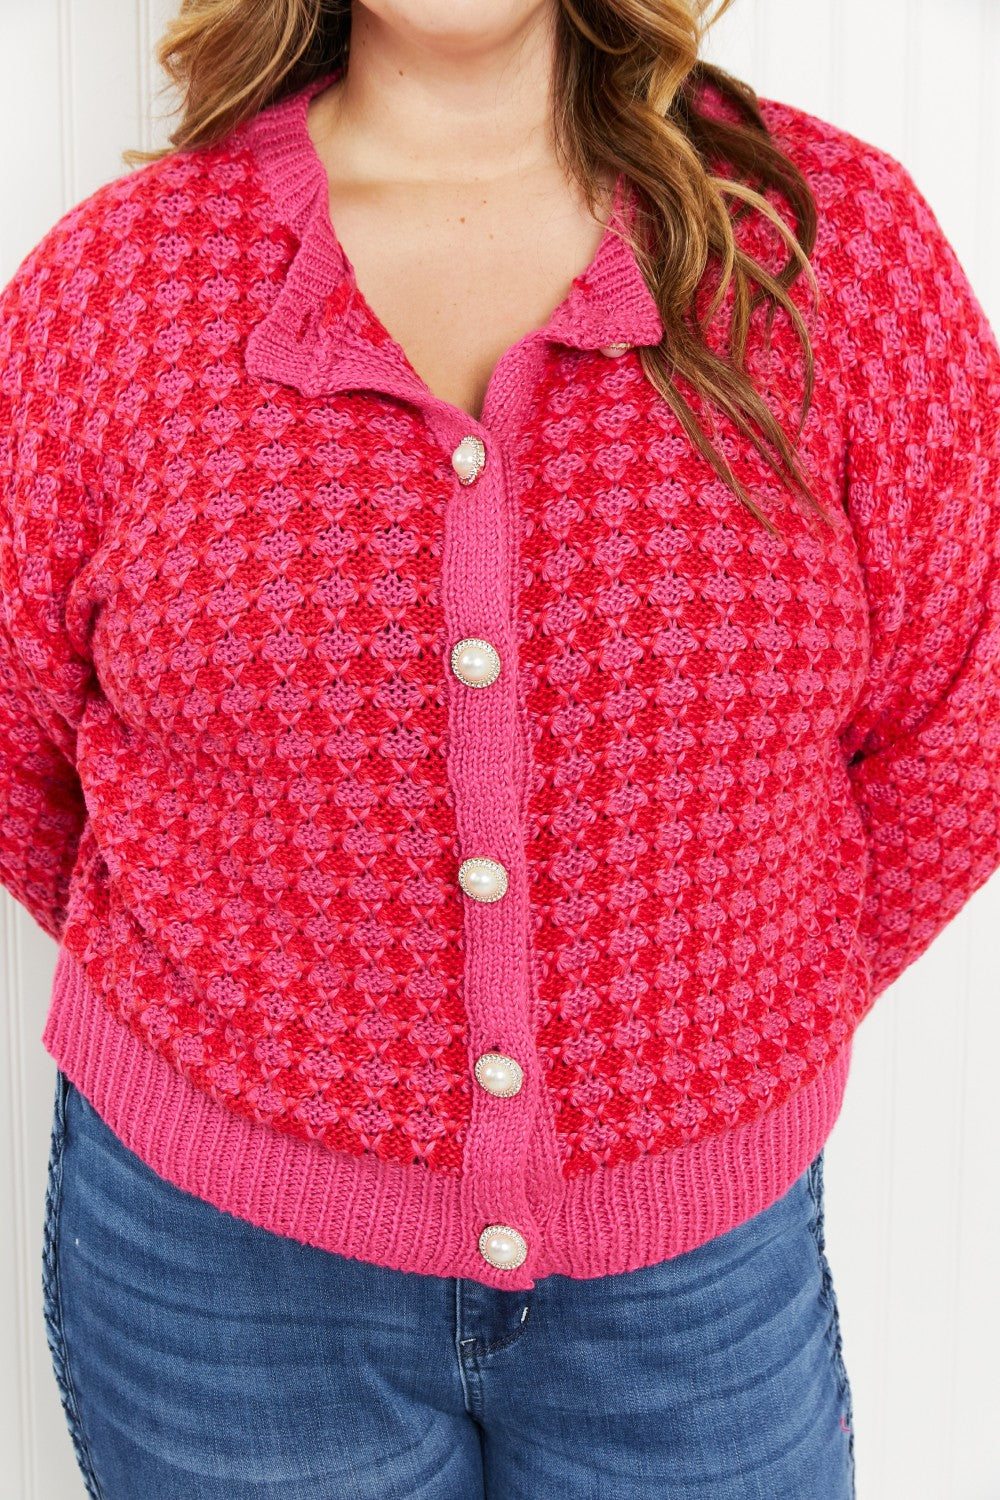 Andree by Unit London Life Tweed Cardigan in Hot Pink